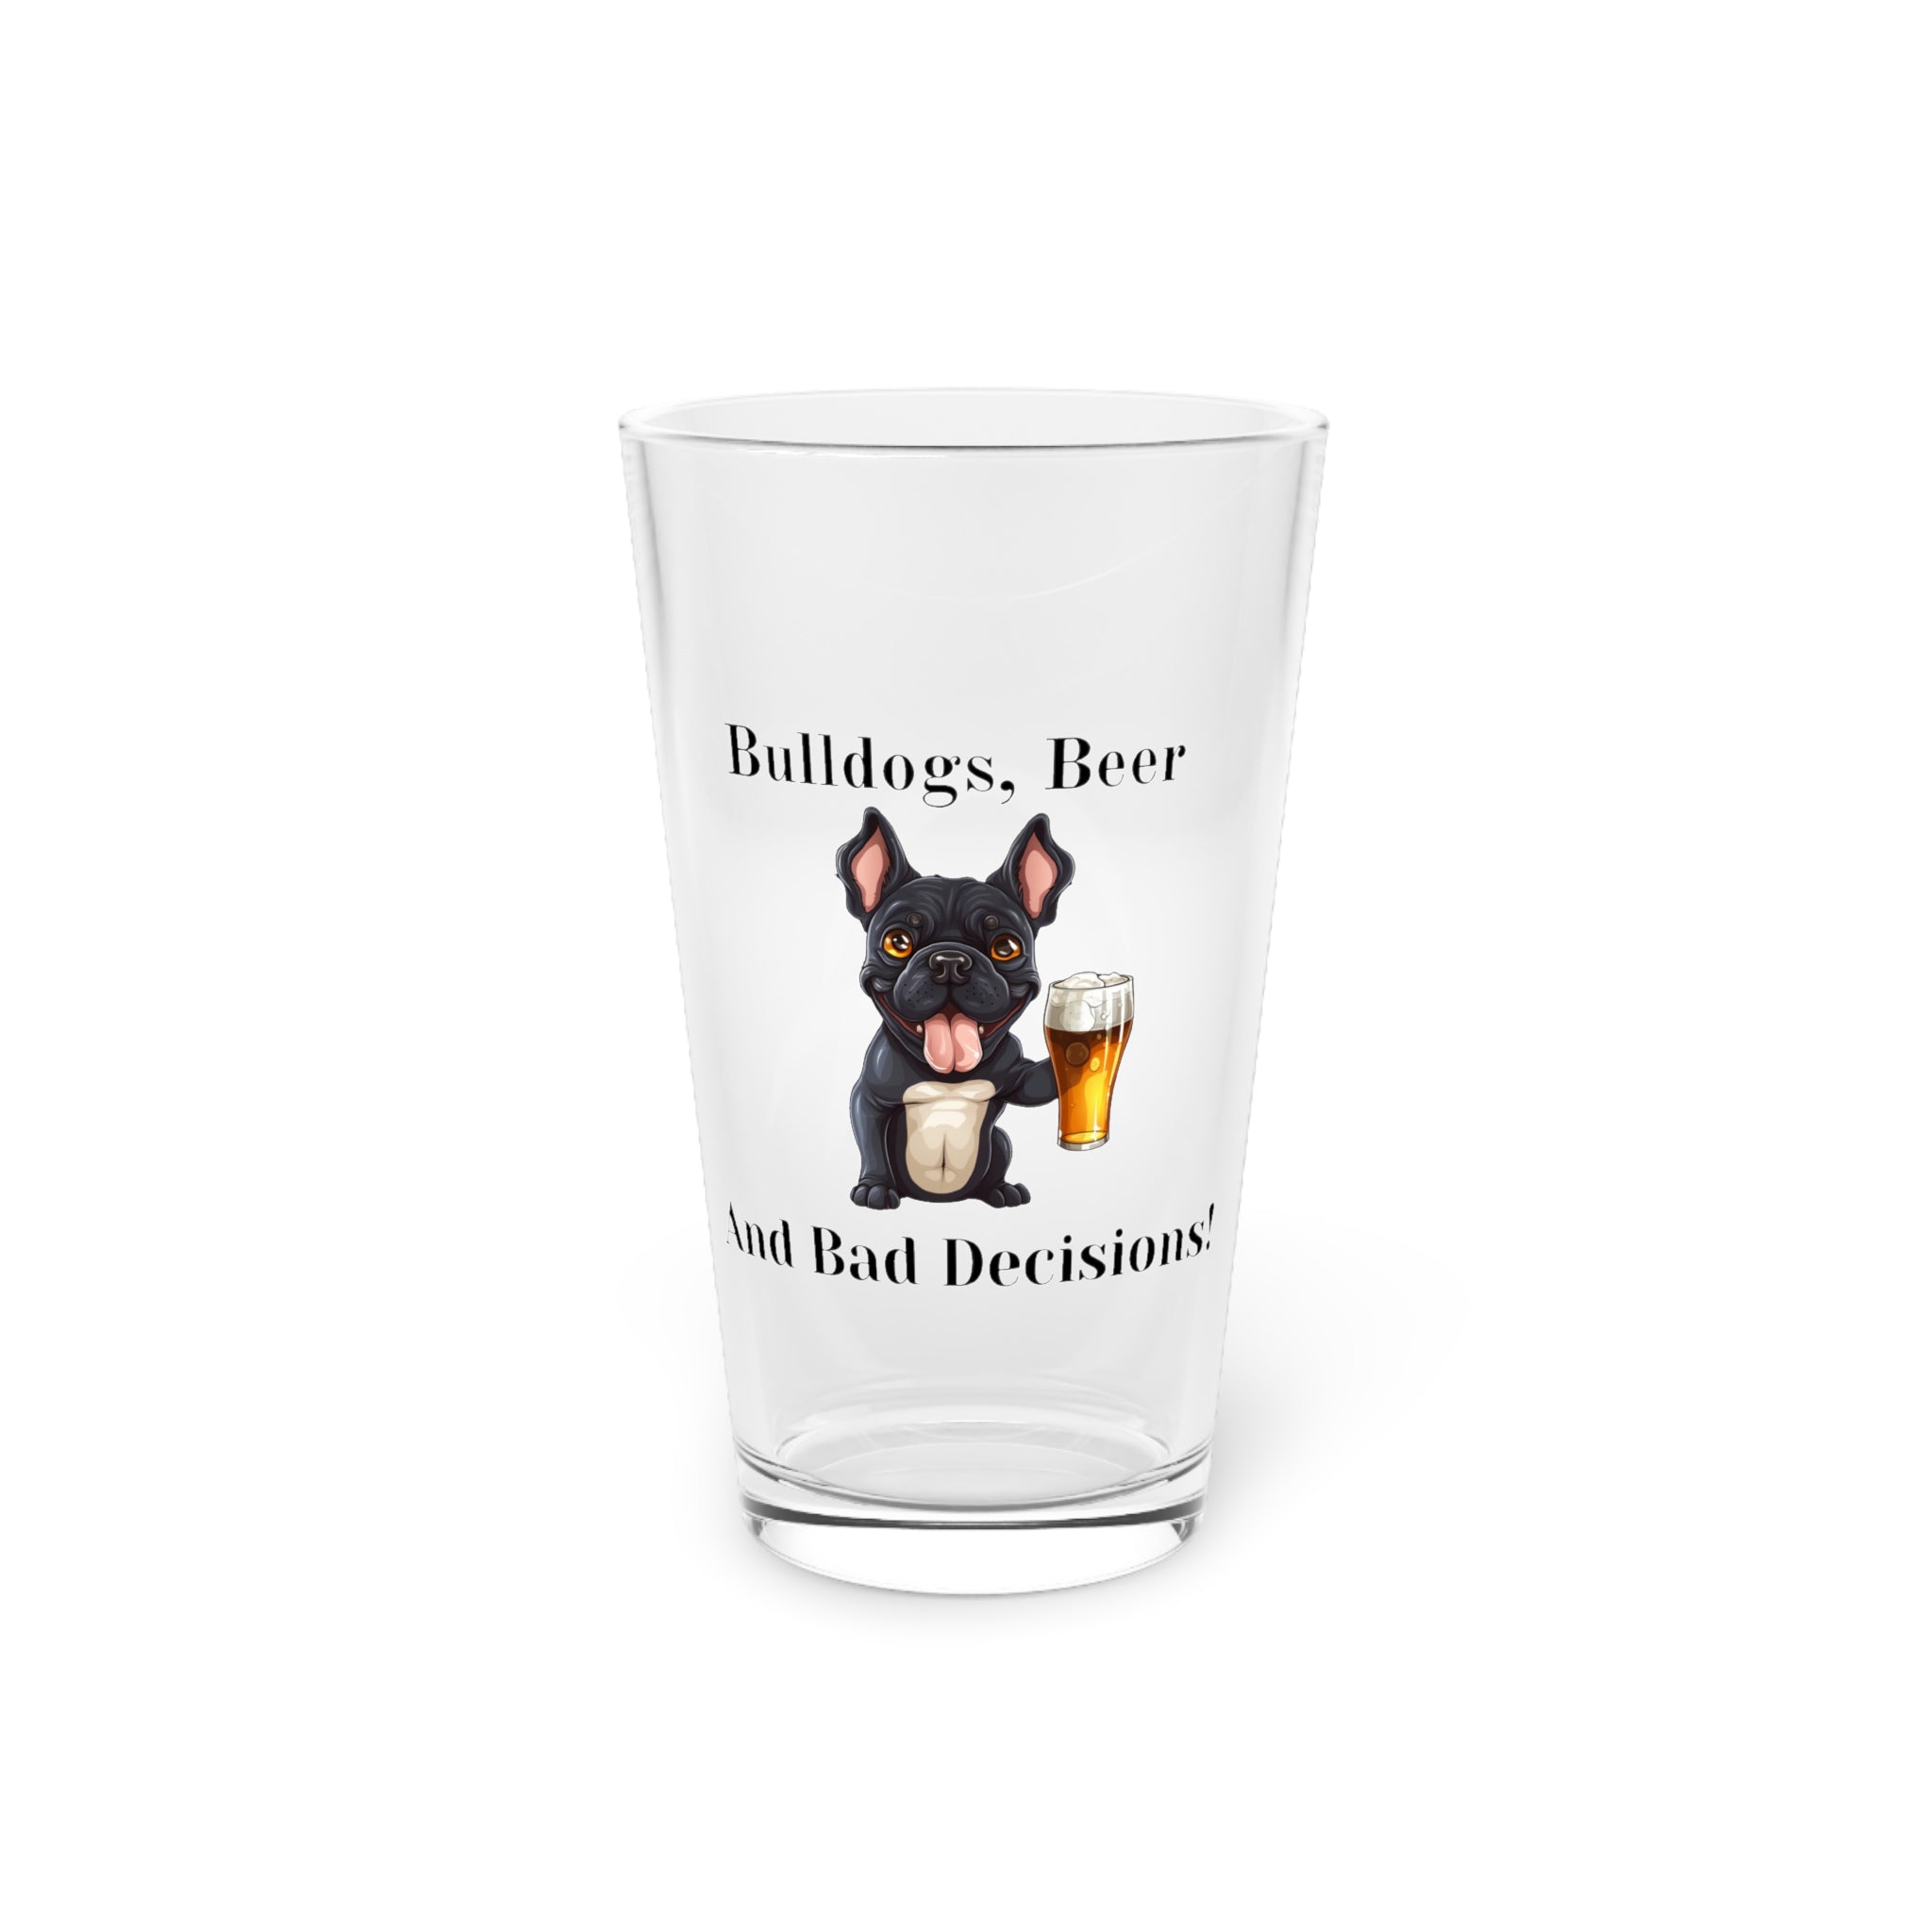 Bulldogs, Beer, and Bad Decisions!" - The Ultimate Pint Glass by Tipsy Bully (French/Black)